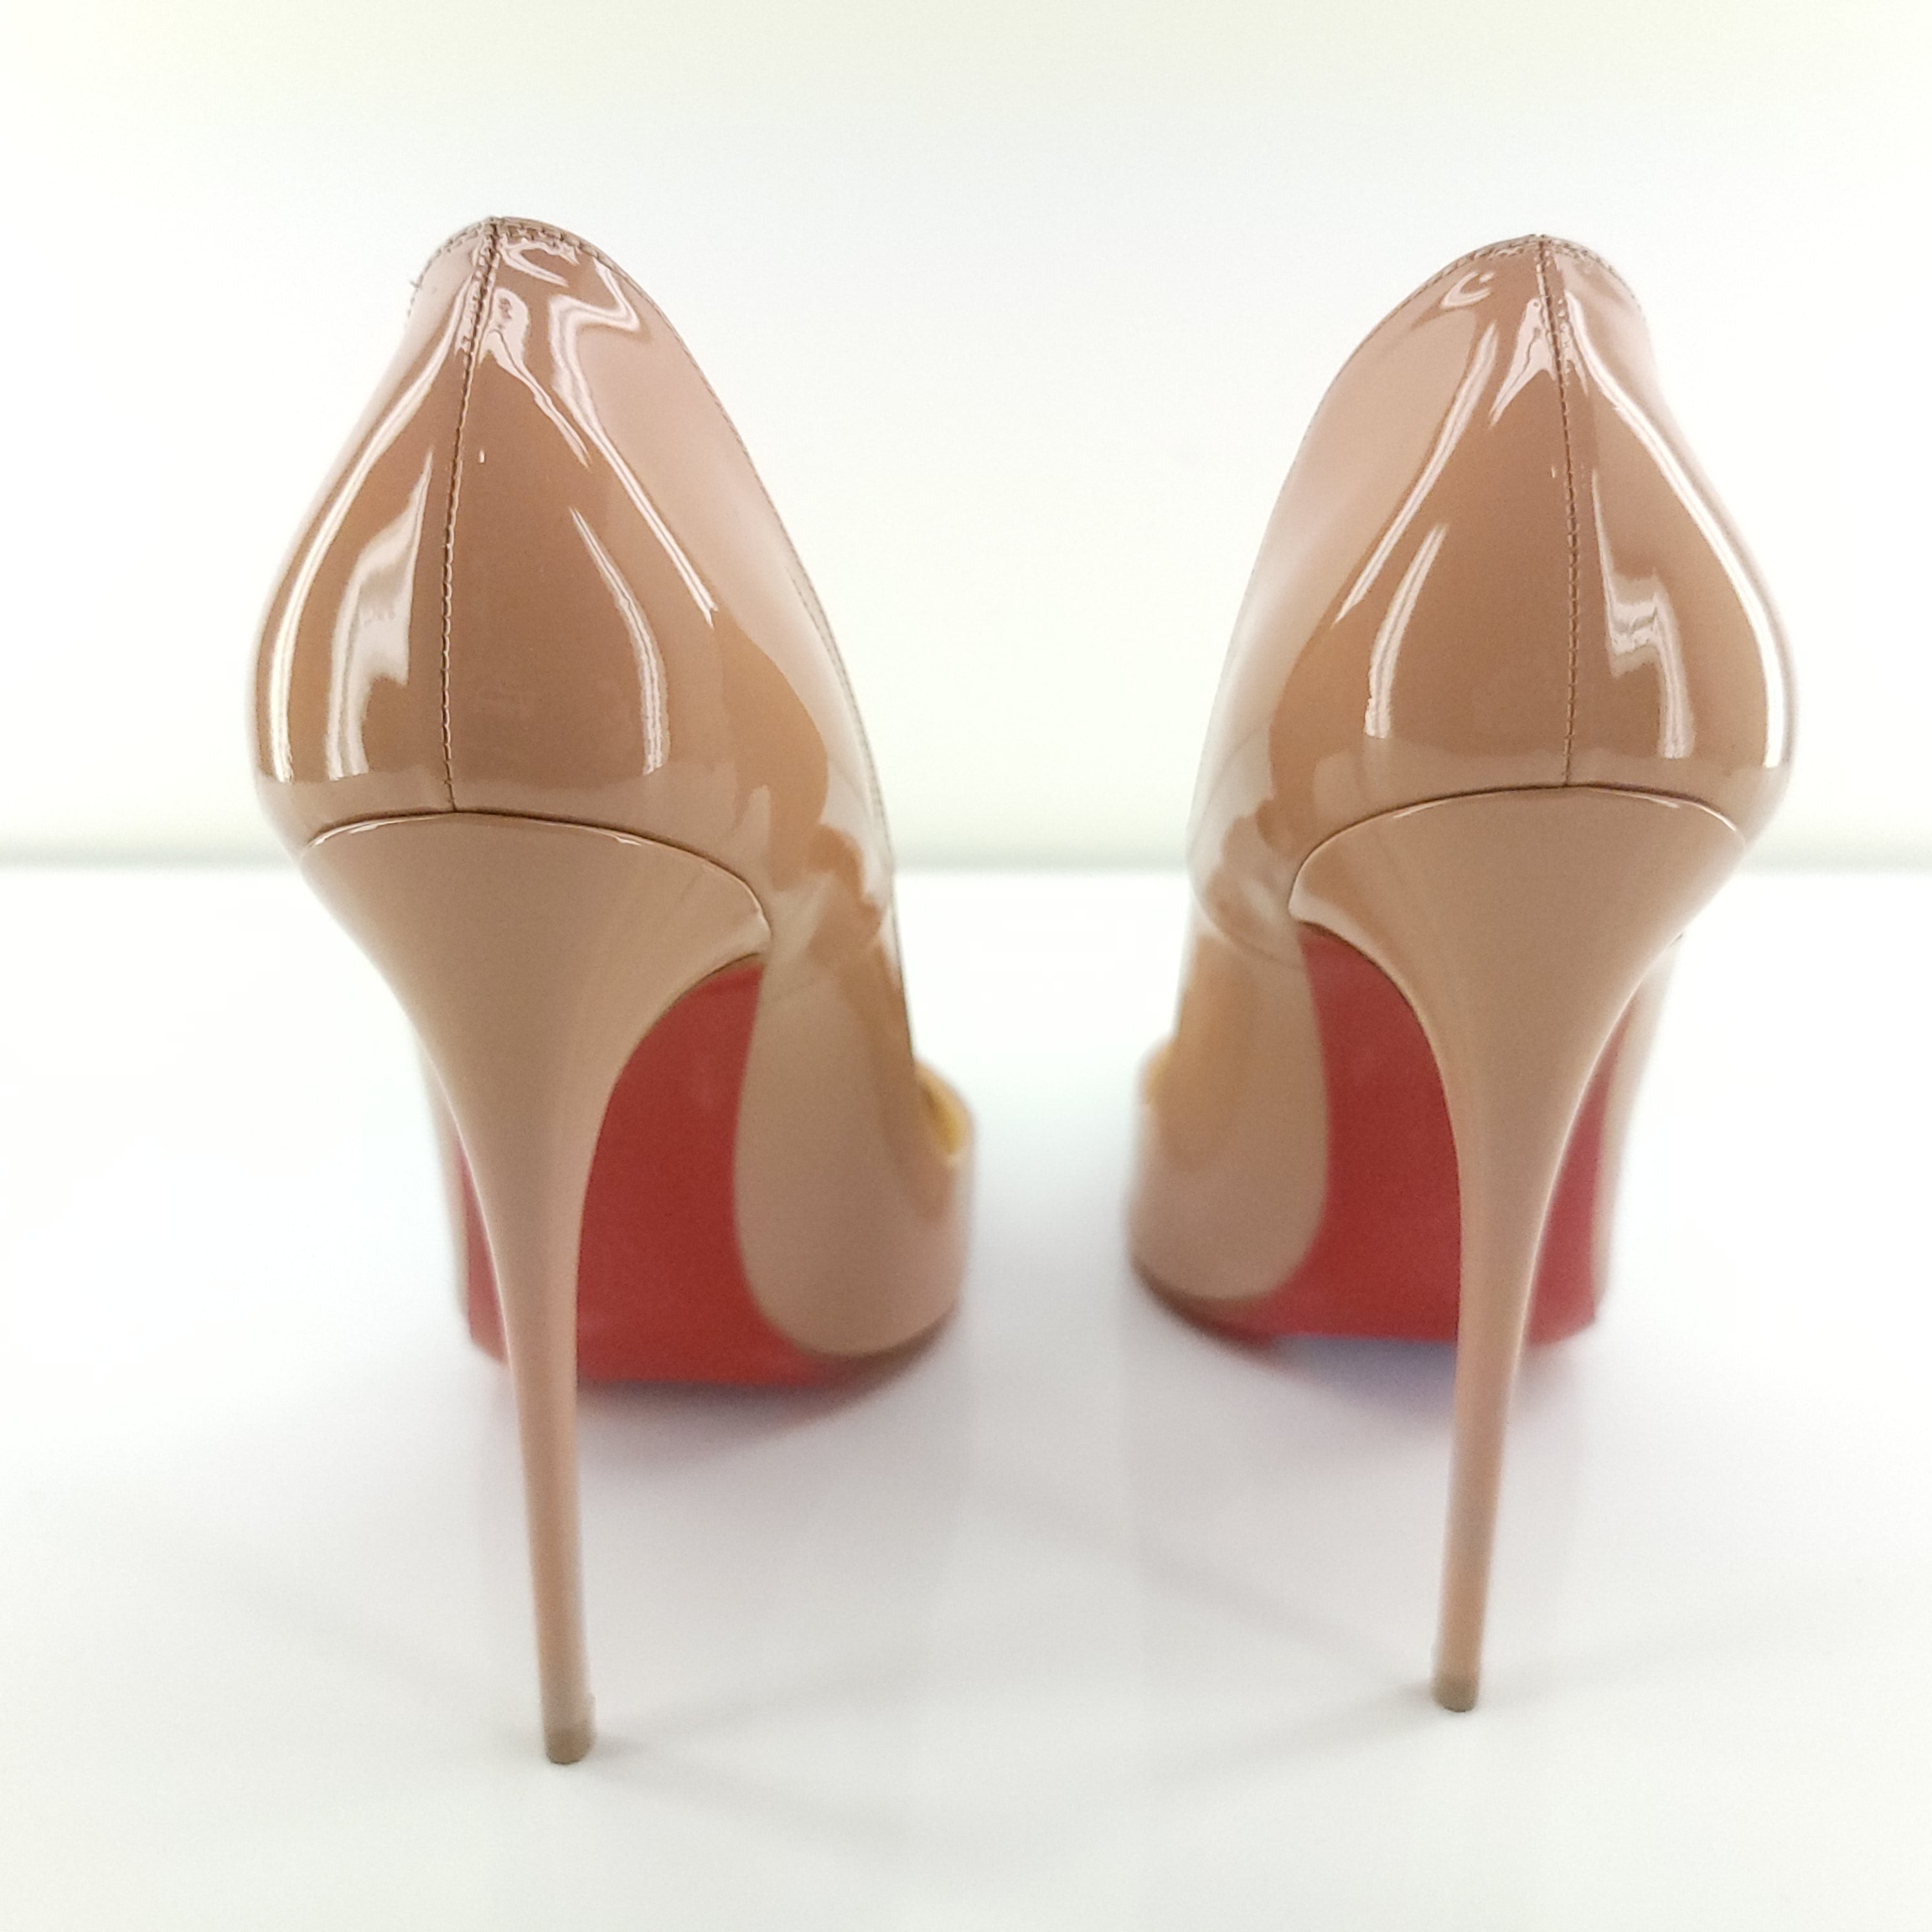 Christian Louboutin Launches Nude Pumps For EVERY Skin Tone – StyleCaster